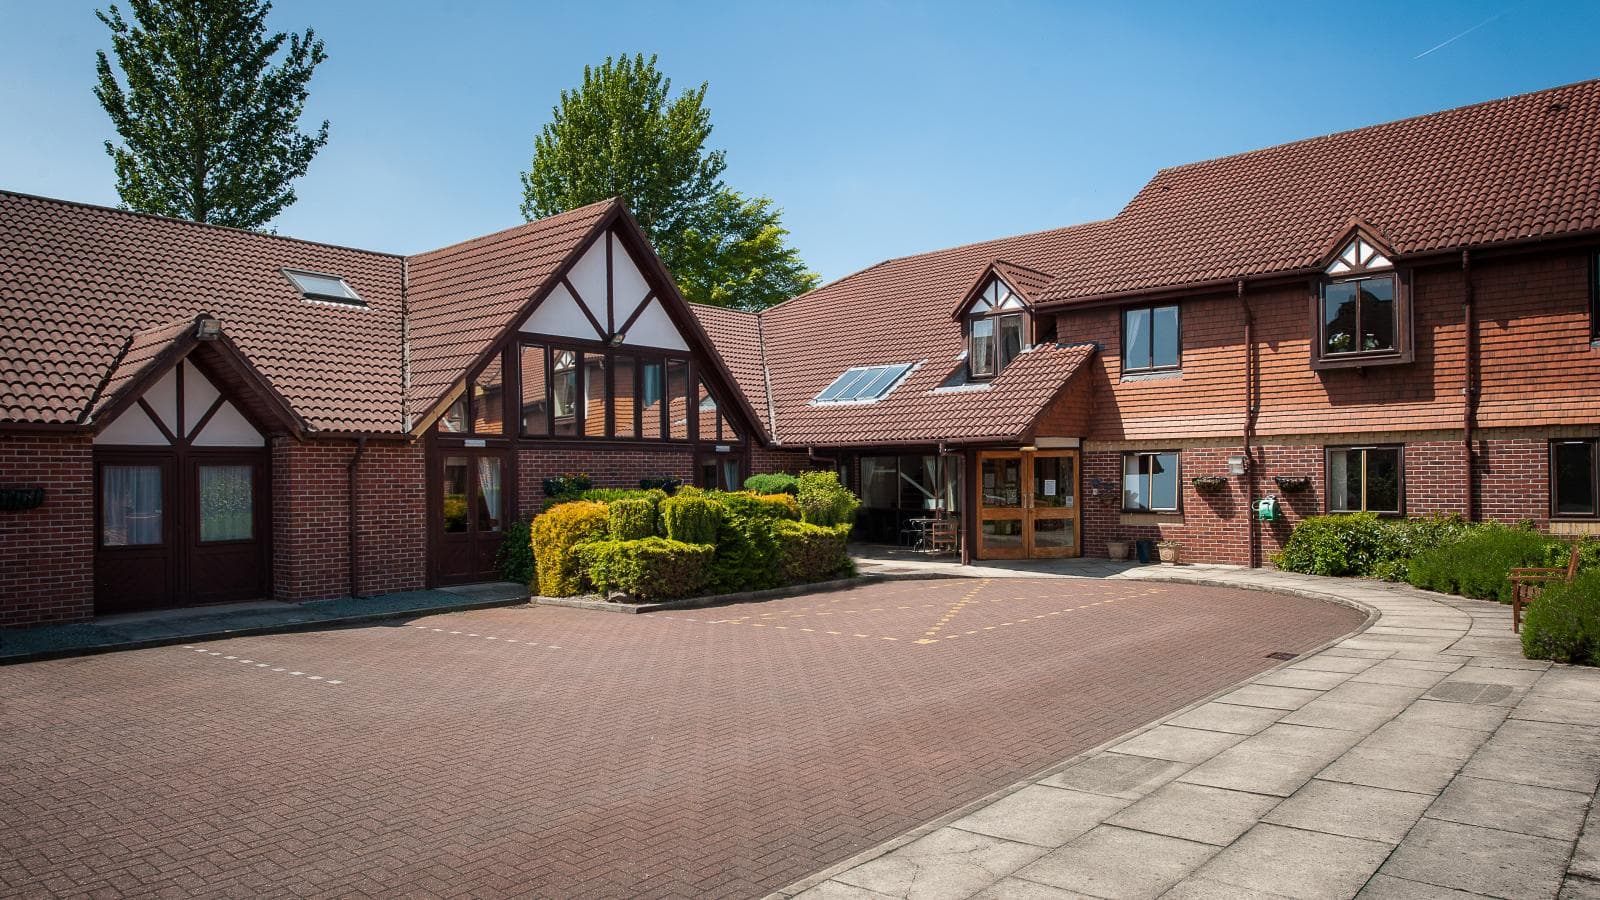 The Willows Care Home